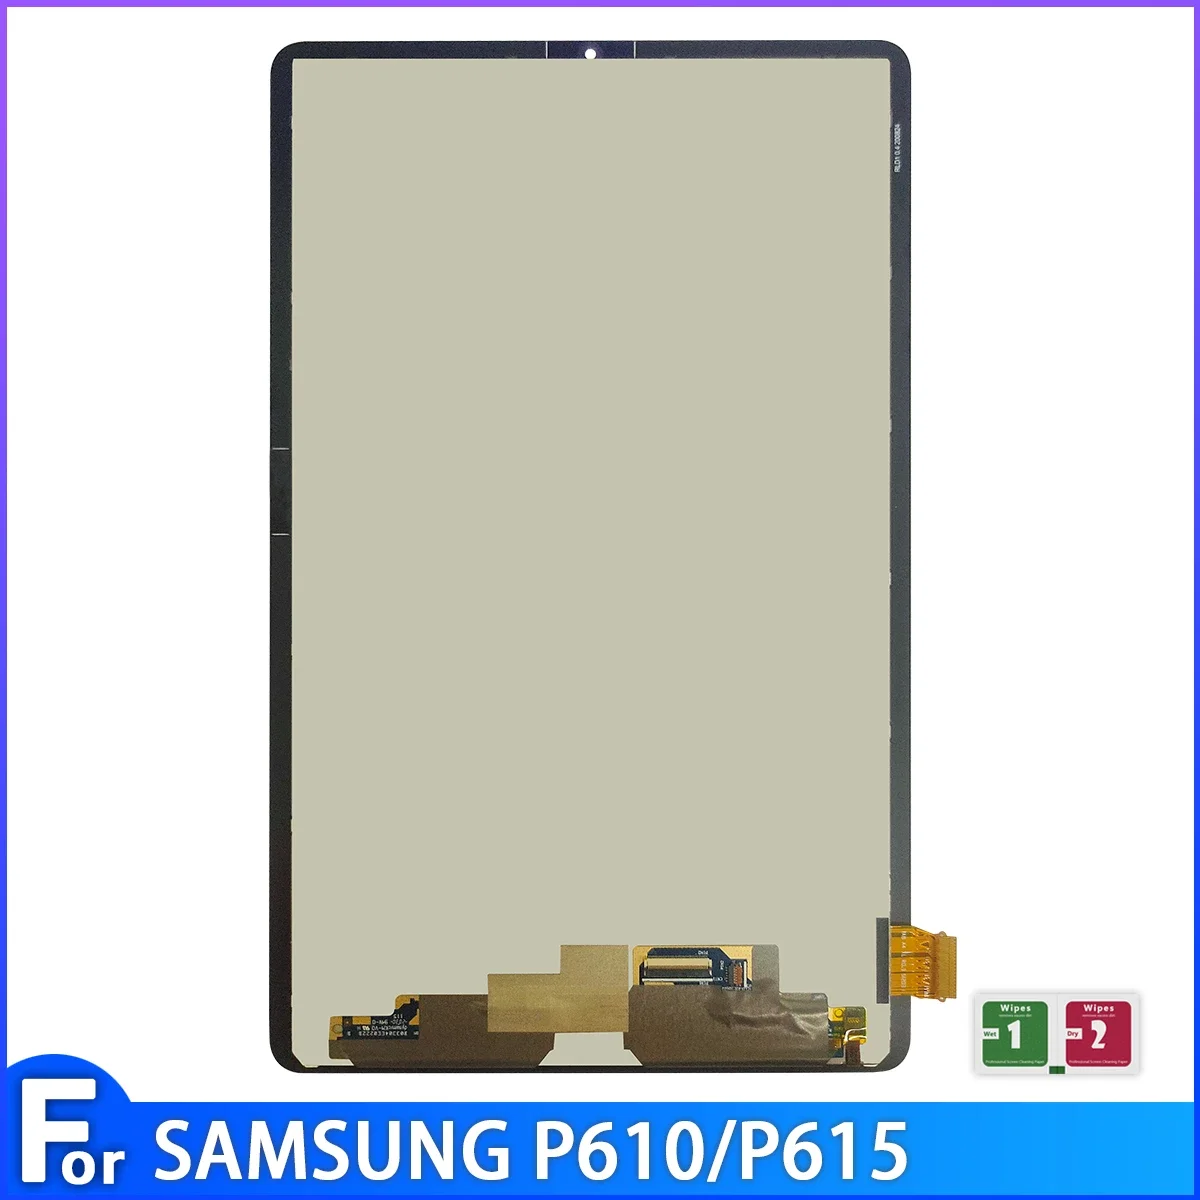 

LCD For Samsung Galaxy Tab S6 Lite P610 P615 SM-P610 SM-P615 LCD Display Touch Screen Glass Panel Digitize Assembly Replacement